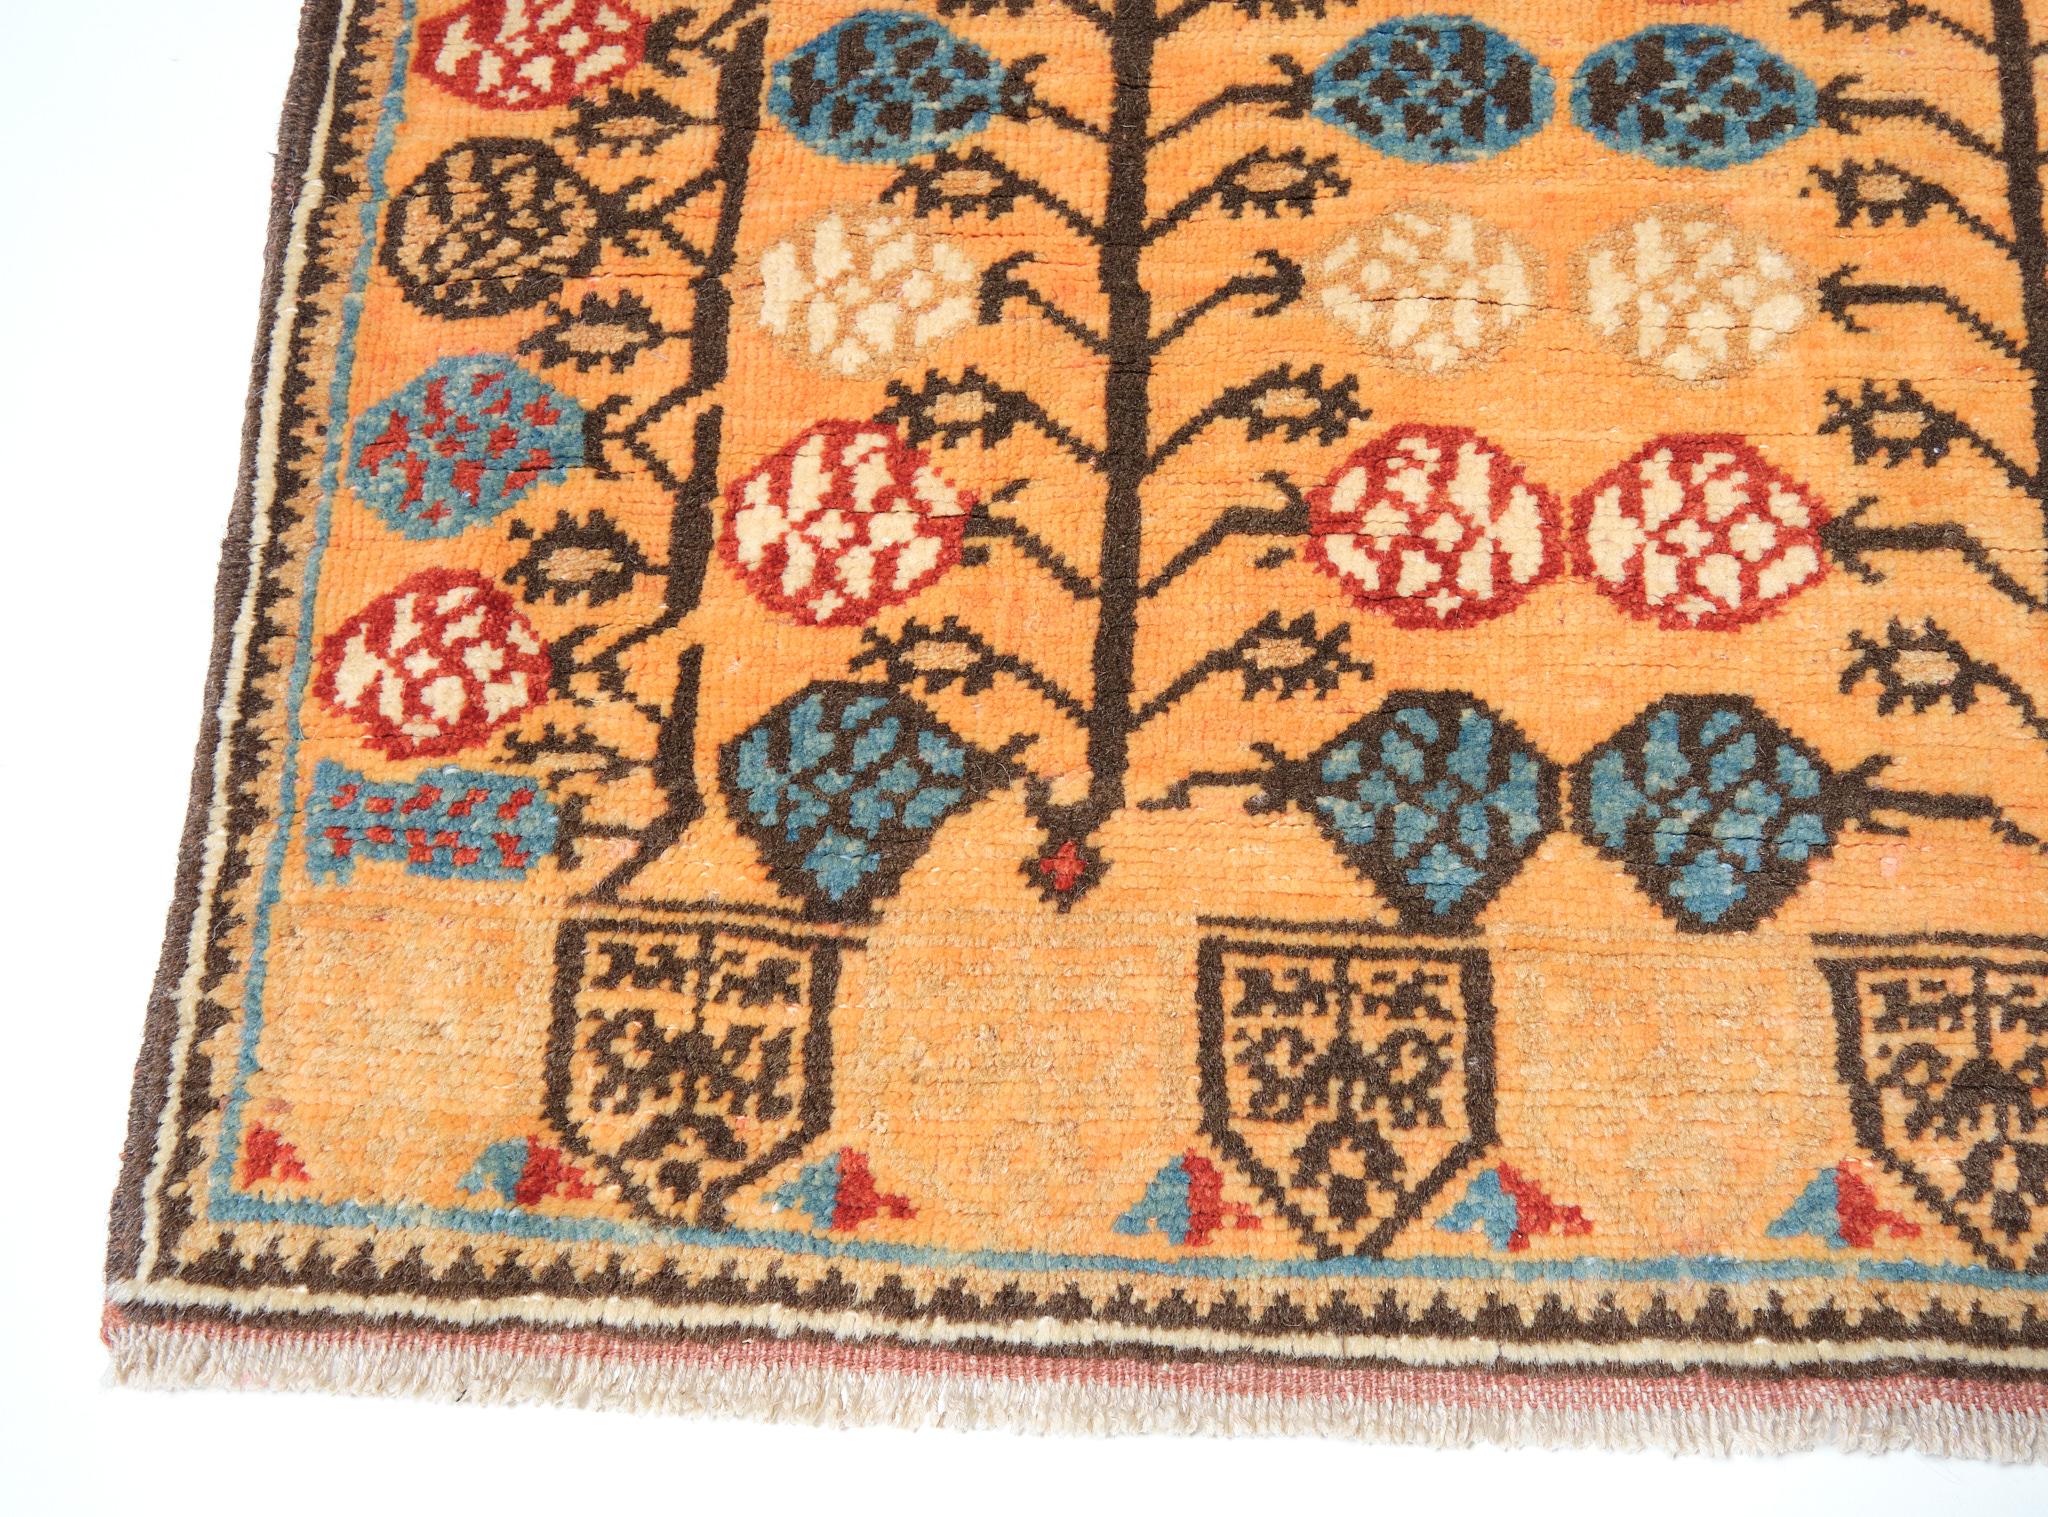 This is a popular design employed by the Turks, a 17th century rug from Turkey, Central Anatolia area. Stylized pomegranate trees with flowers and fruits, many diverse colored floral figures on an orange ground with both ends prayer arch (mihrab)